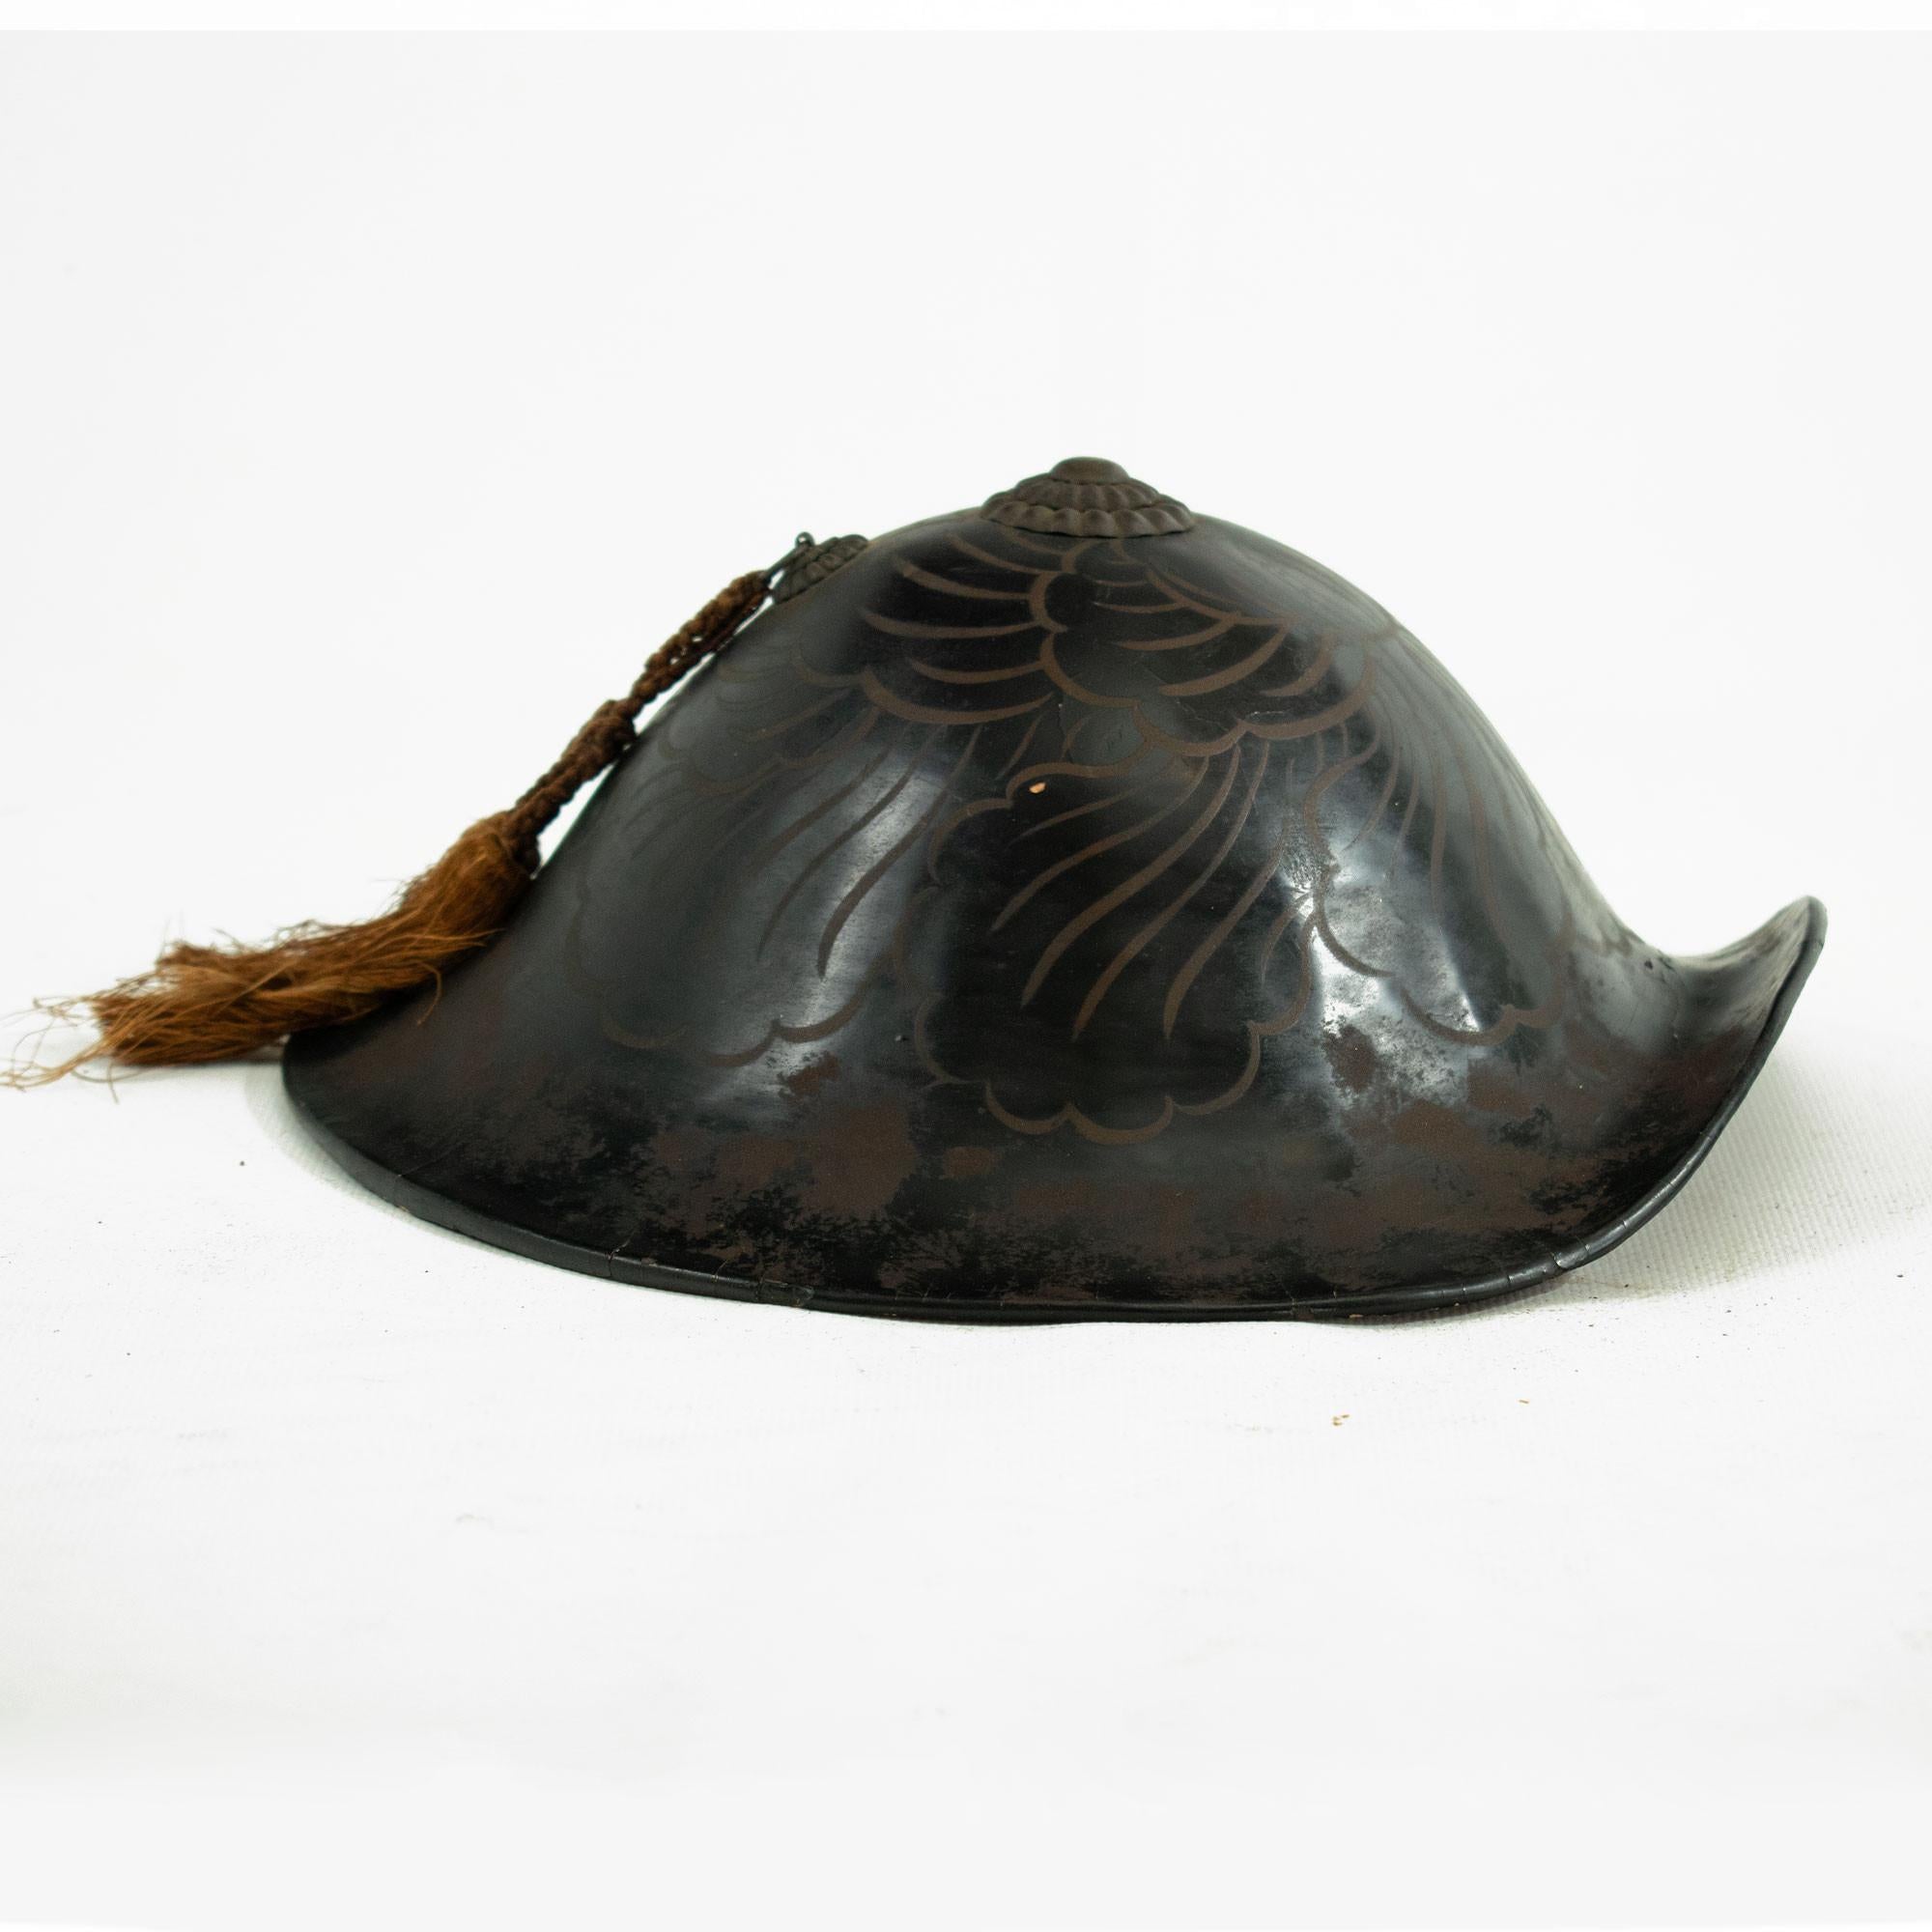 Original children's jingasa from the Edo period, rounded Samurai headdress called Bajô-Gasa in wood covered with black lacquer possibly decorated with a kamon, a heraldic badge in brown.

A tehen kanamono (copper ornament sometimes decorated) is